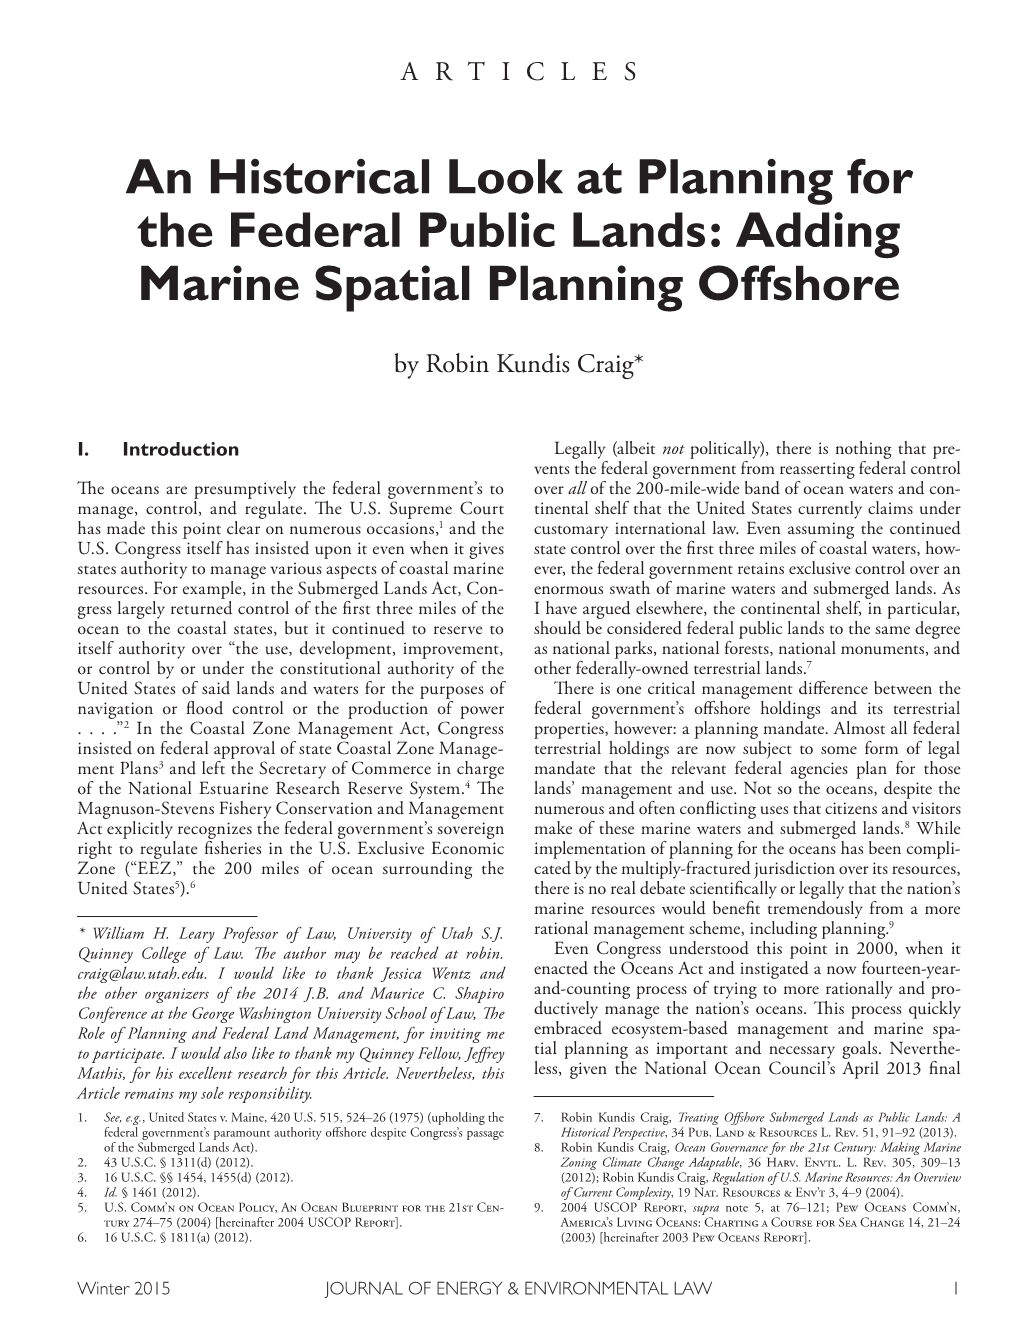 An Historical Look at Planning for the Federal Public Lands: Adding Marine Spatial Planning Offshore